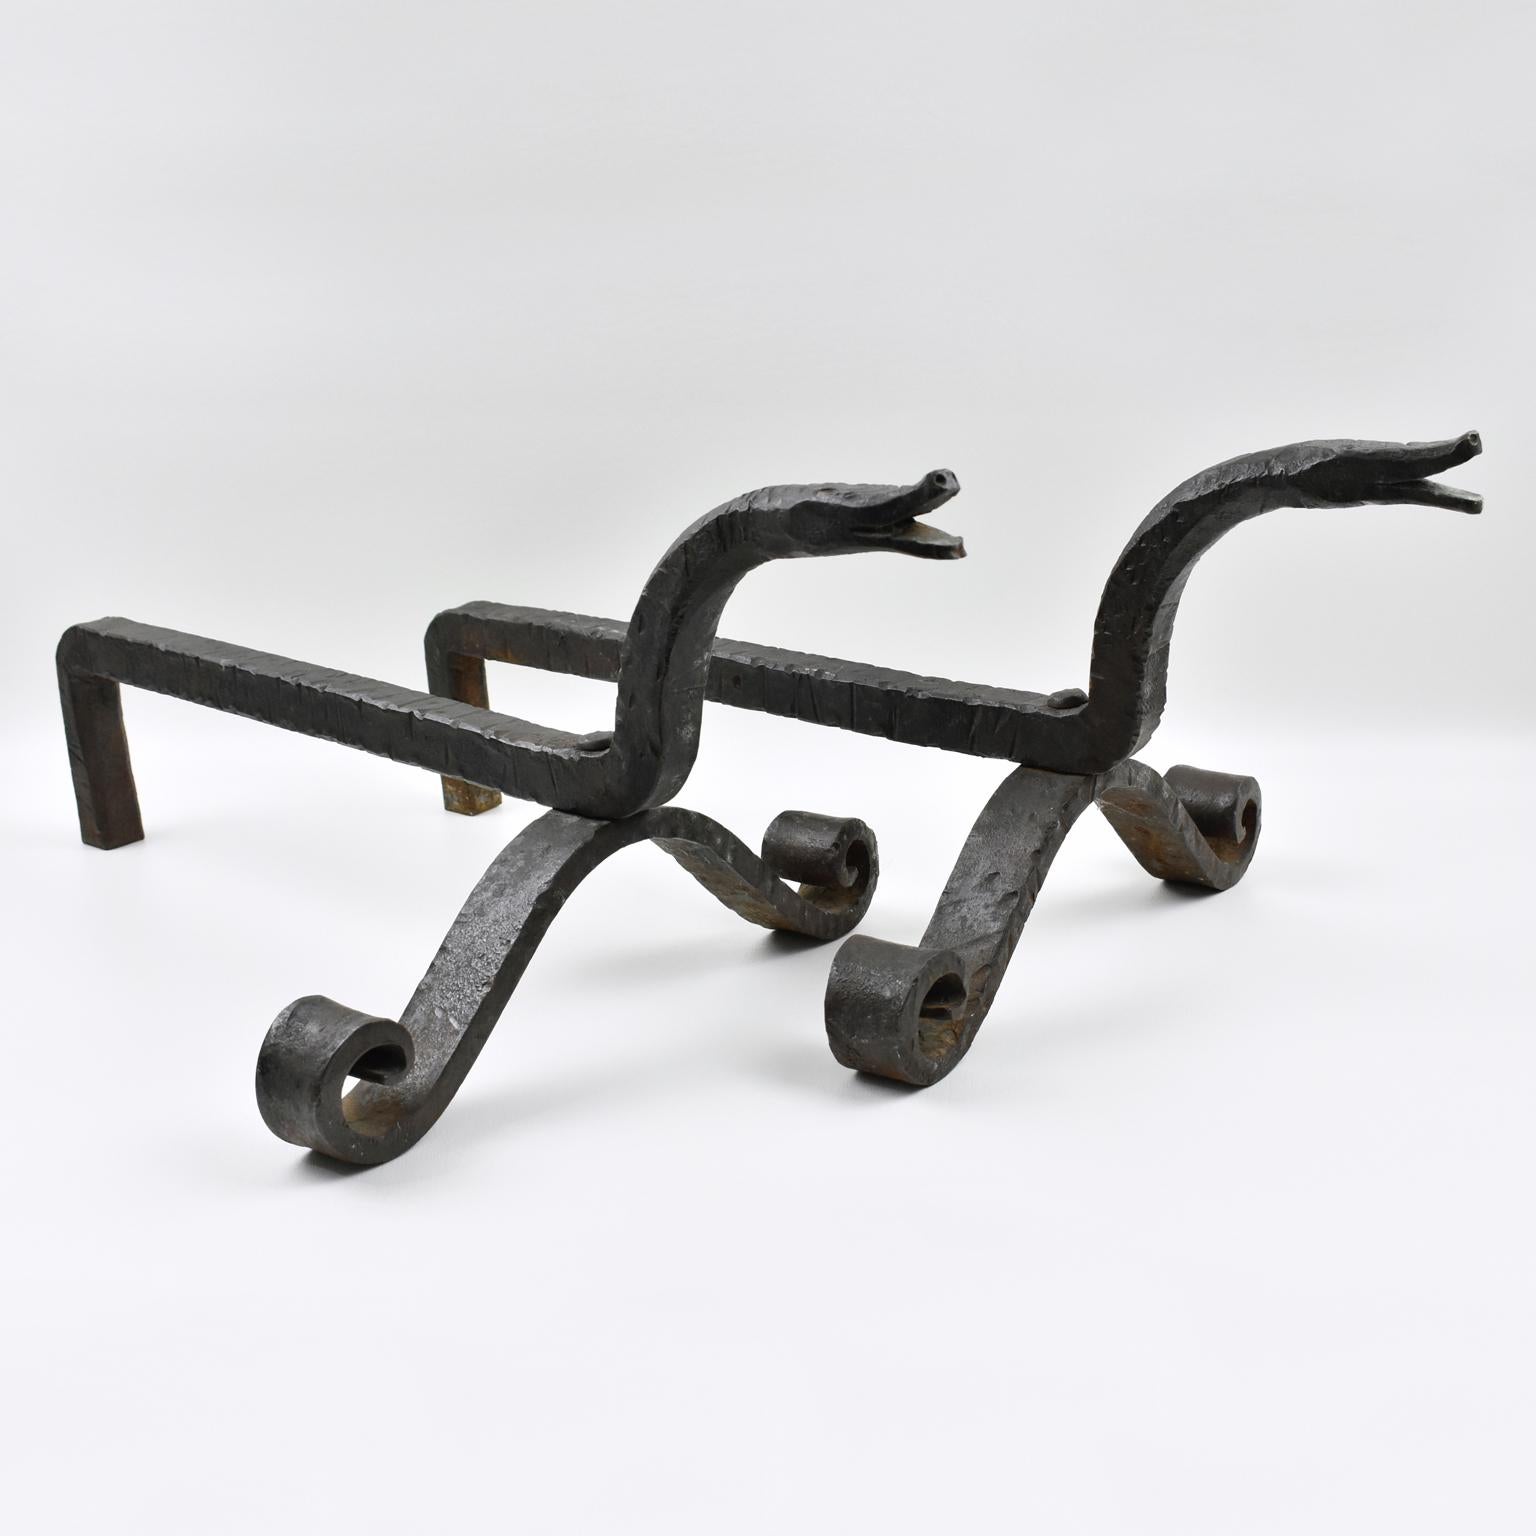 Outstanding pair of French wrought iron andirons in the manner of Edouard Schenck, early 20th Century. Dynamic form, with stylized carved snakeheads. No visible maker's mark.
Measurements: 12.19 in. wide (31 cm) x 22 in. deep (56 cm) x 9.44 in.